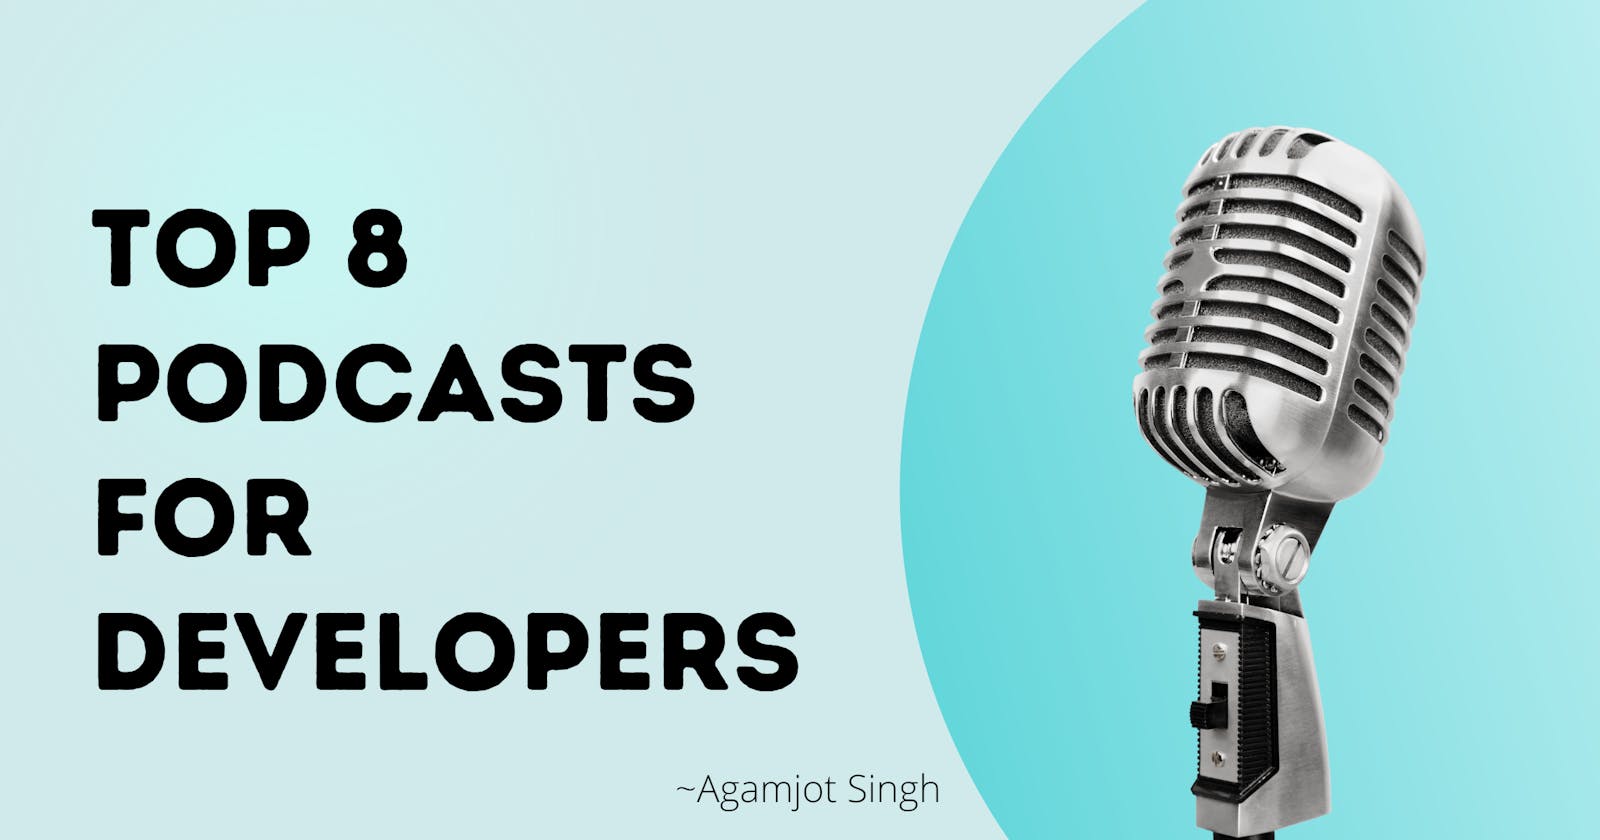 Top  8 Podcasts for Developers